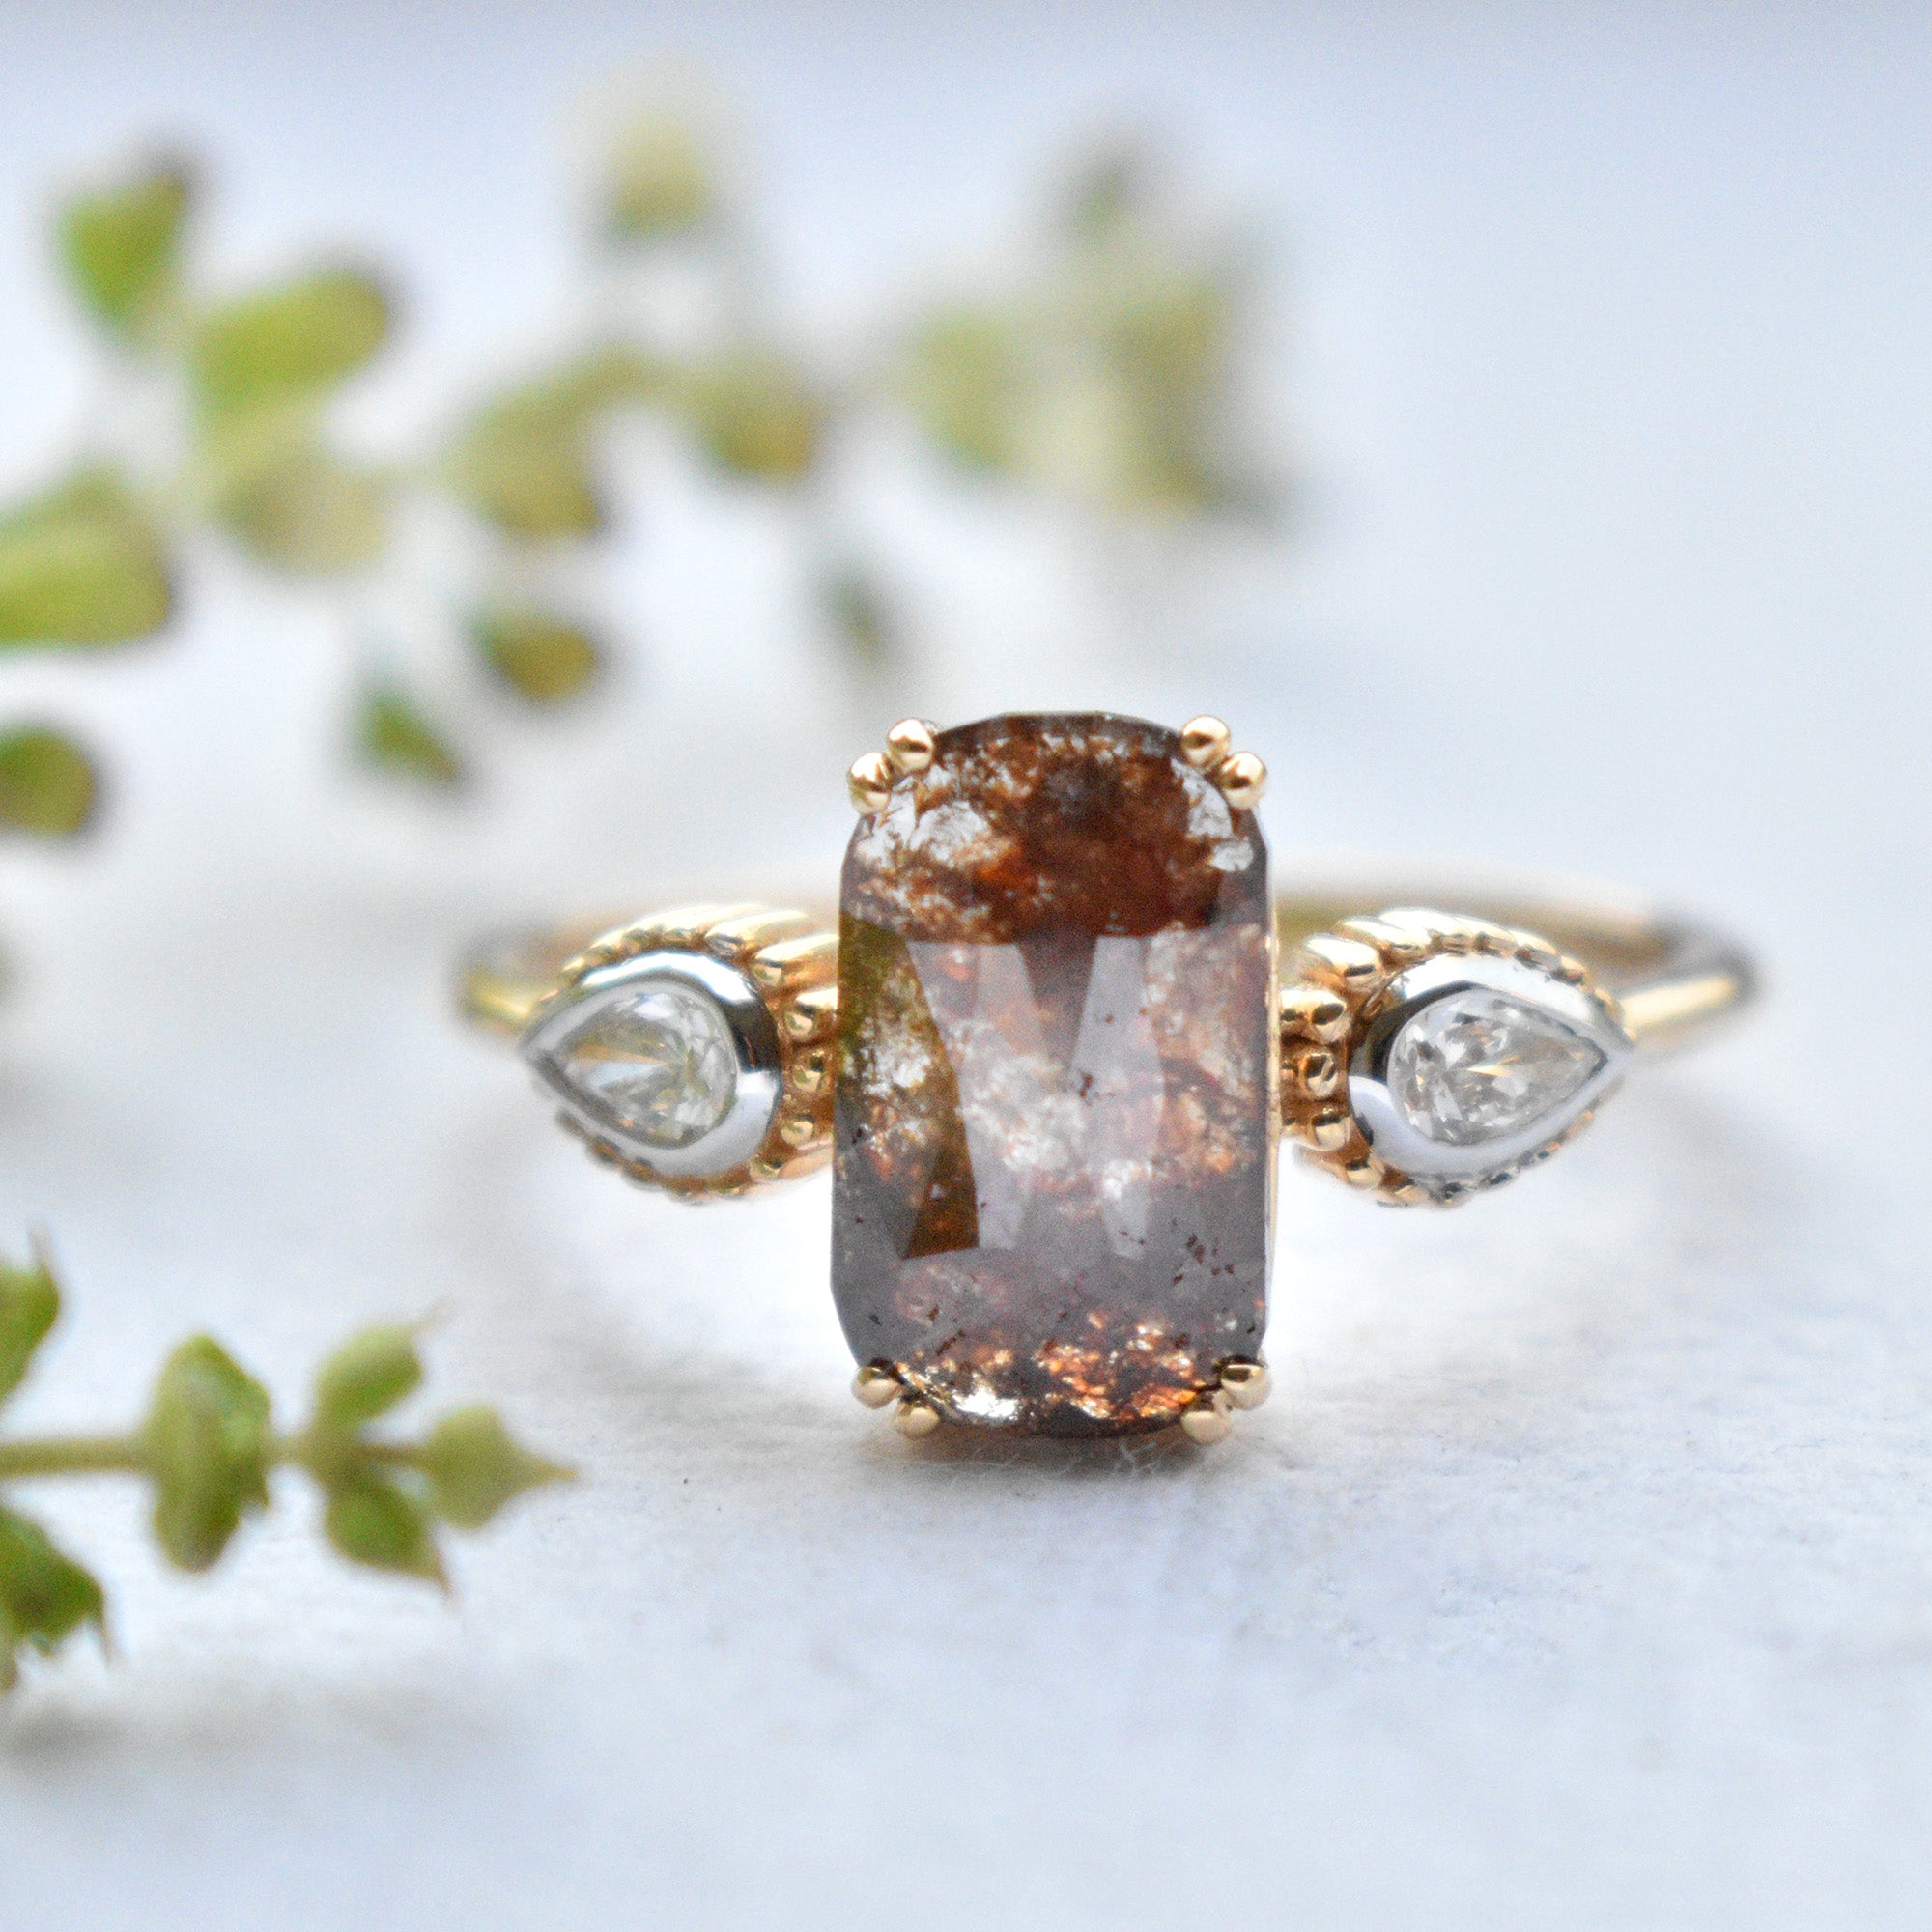 Brown Rosecut 3 Diamond Engagement Ring with Natural White Pear Diamond Accents in Solid 14K Yellow Gold